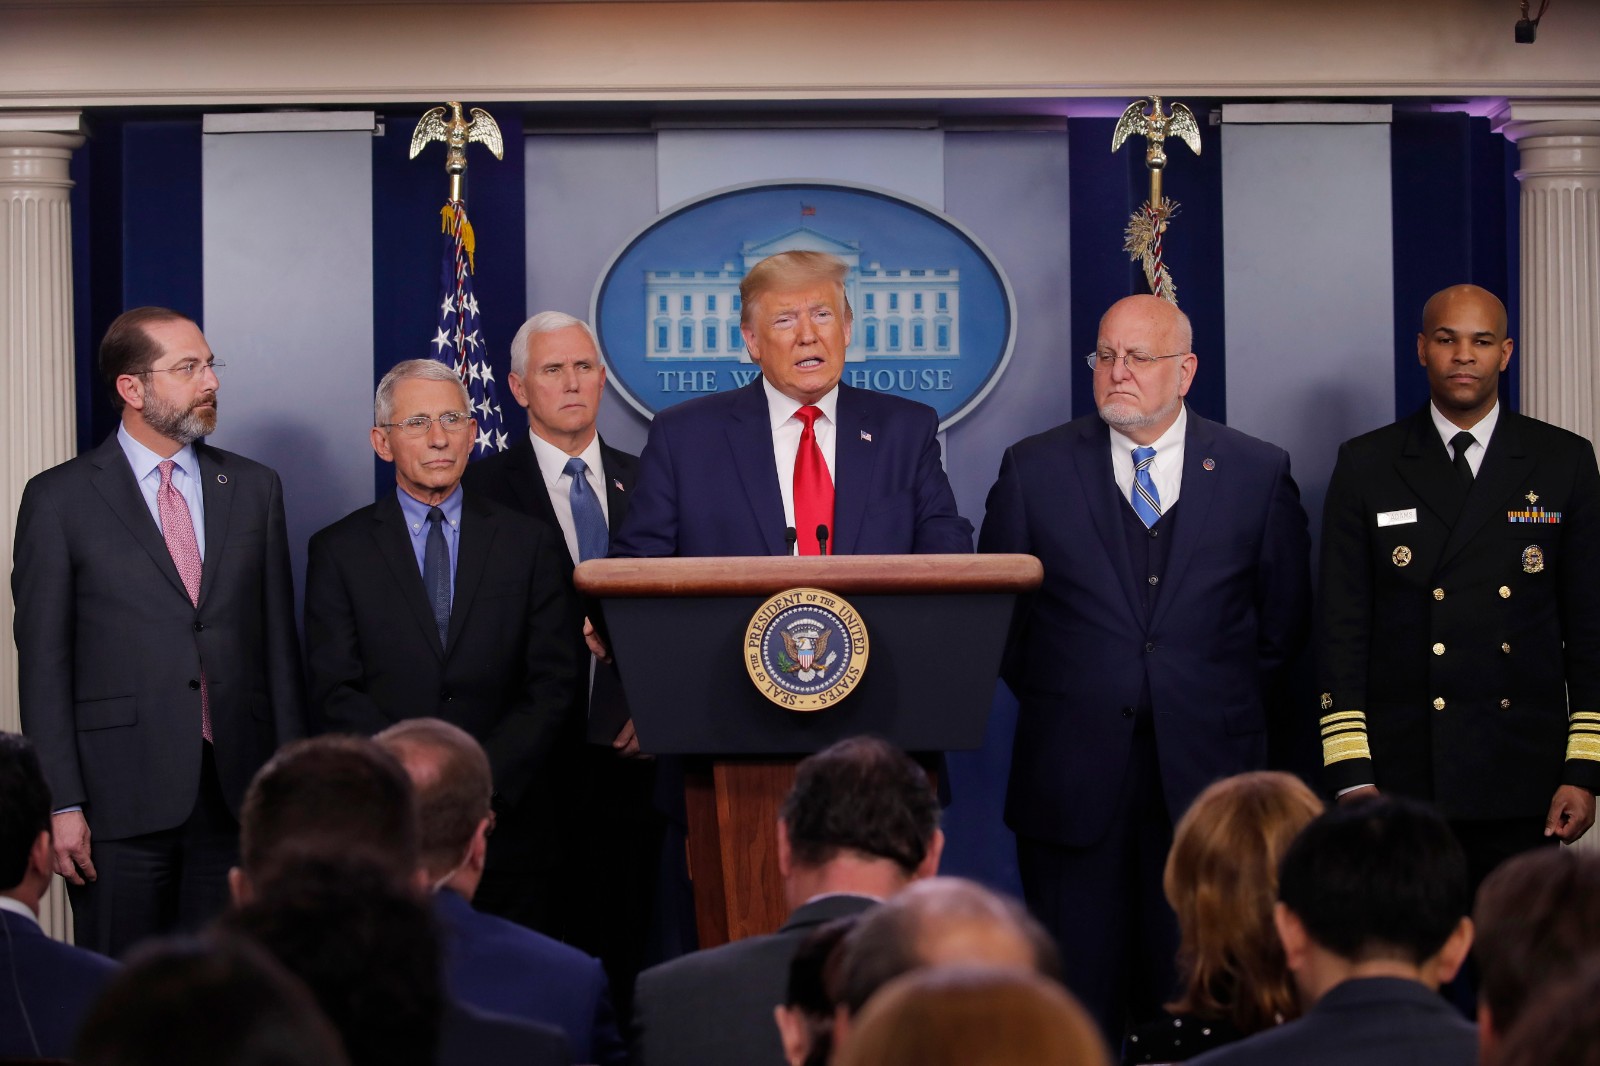 President Donald Trump speaks about the coronavirus in the press briefing room at the White House, Saturday, Feb. 29, 2020, in Washington as Health and Human Services Secretary Alex Azar, National Institute for Allergy and Infectious Diseases Director Dr. Anthony Fauci, Vice President Mike Pence, Robert Redfield, director of the Centers for Disease Control and Prevention and U.S. Surgeon General Dr. Jerome Adams listen. (AP Photo/Carolyn Kaster)